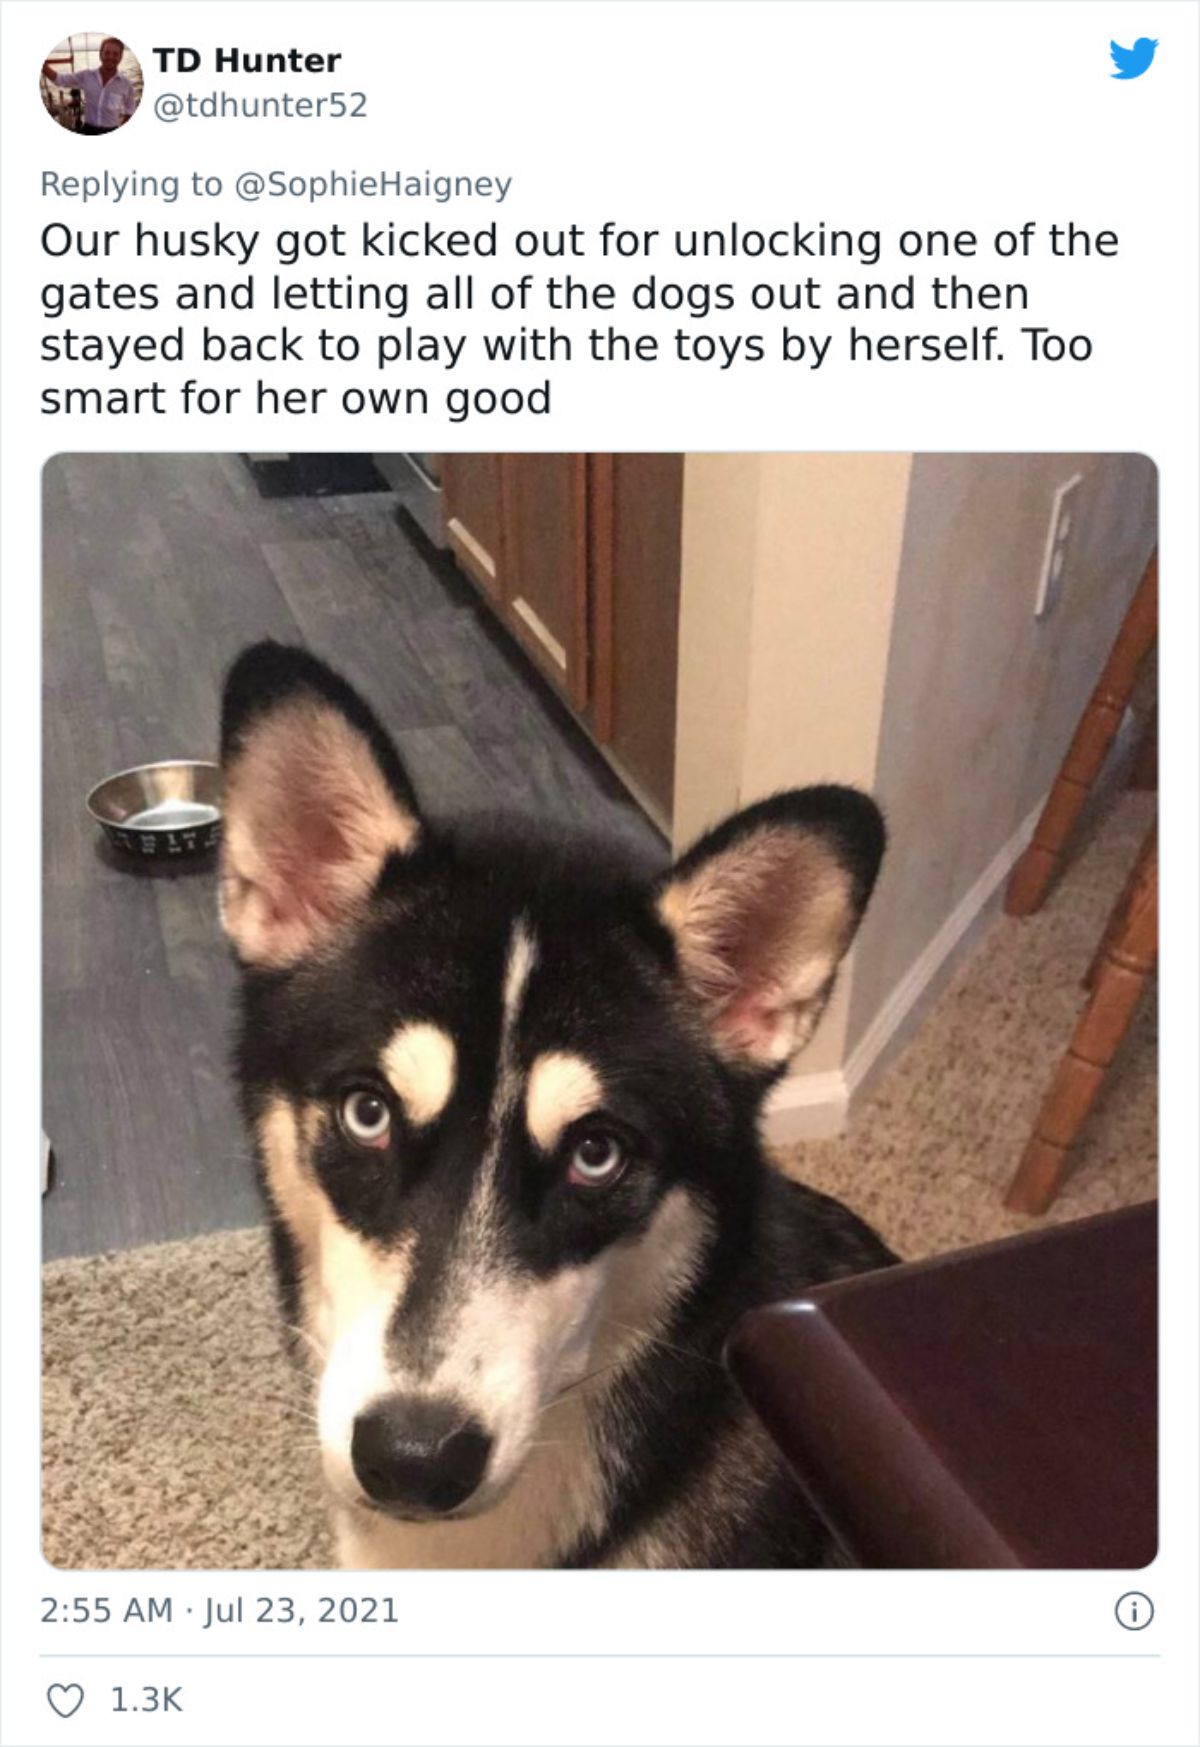 a tweet with a photo of a black and white husky saying he got kicked out for unlocking the gates to let the dogs out so she can play with all the toys